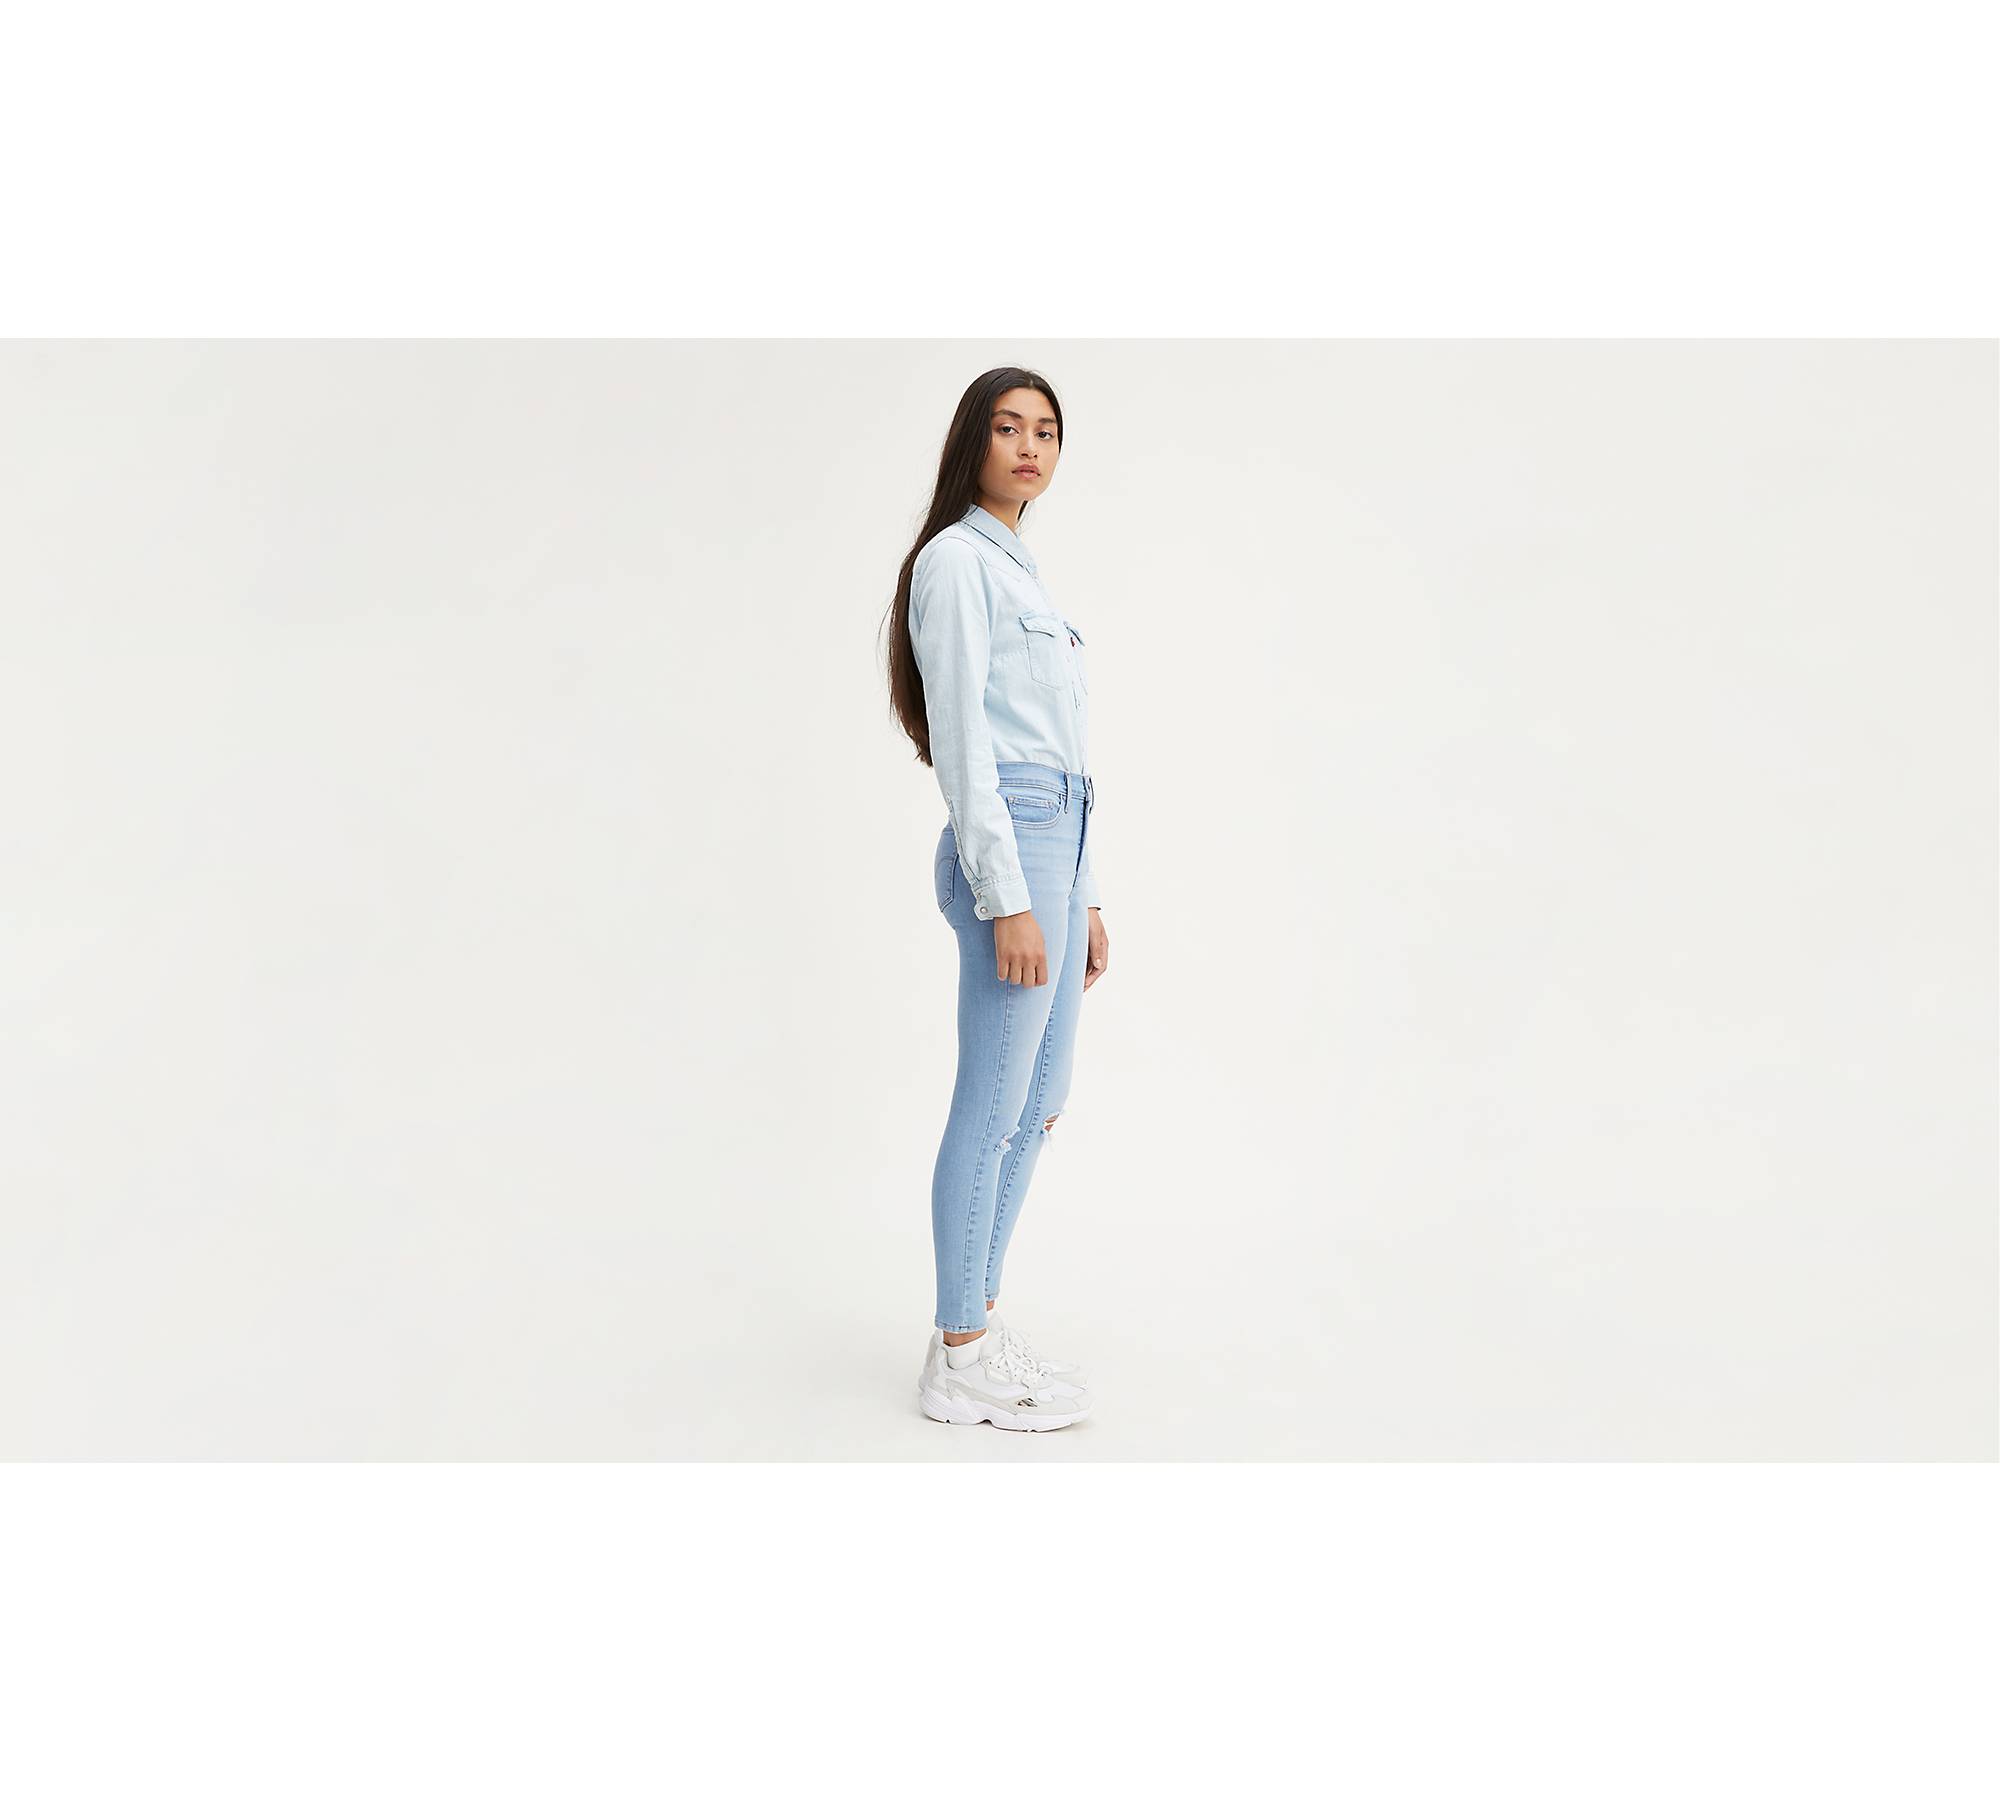 310 Shaping Super Skinny Ripped Women's Jeans - Light Wash | Levi's® US